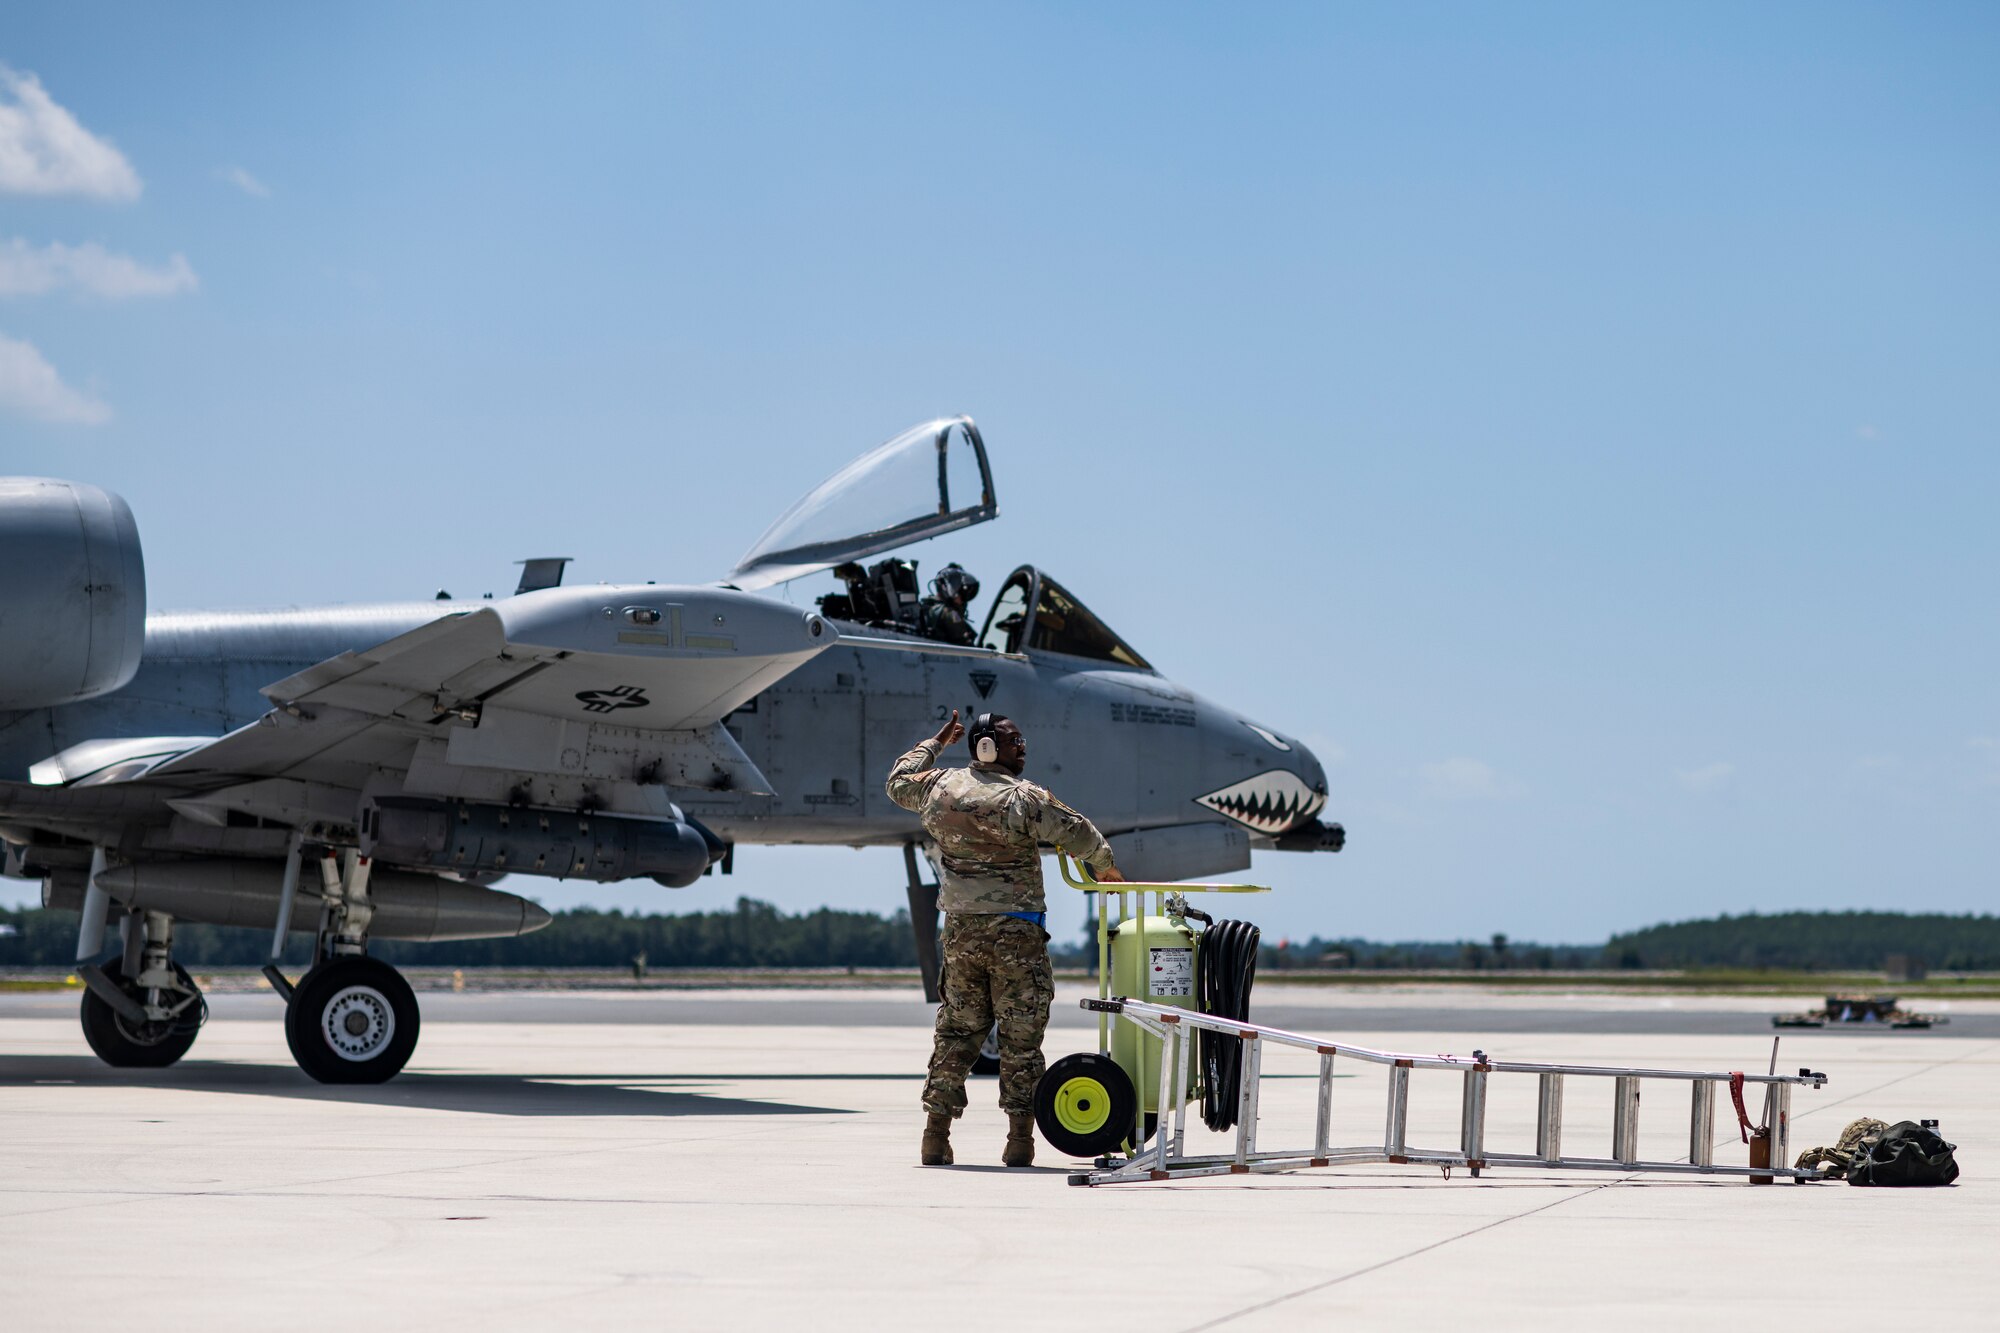 A U.S. Air Force pilot assigned to the 74th Fighter Squadron taxis an A-10C Thunderbolt II during Exercise Ready Tiger 24-1 at Avon Park Air Force Range, Florida, April 10, 2024. The 74th FS conducted flying operations for the exercise, responding to planned scenarios in a simulated Indo-Pacific area of responsibility. During Ready Tiger 24-1, exercise inspectors will assess the 23rd Wing's proficiency in employing decentralized command and control to fulfill air tasking orders across geographically dispersed areas amid communication challenges, integrating Agile Combat Employment principles such as integrated combat turns, forward aerial refueling points, multi-capable Airmen, and combat search and rescue capabilities. (U.S. Air Force photo by Tech. Sgt. Devin Boyer)